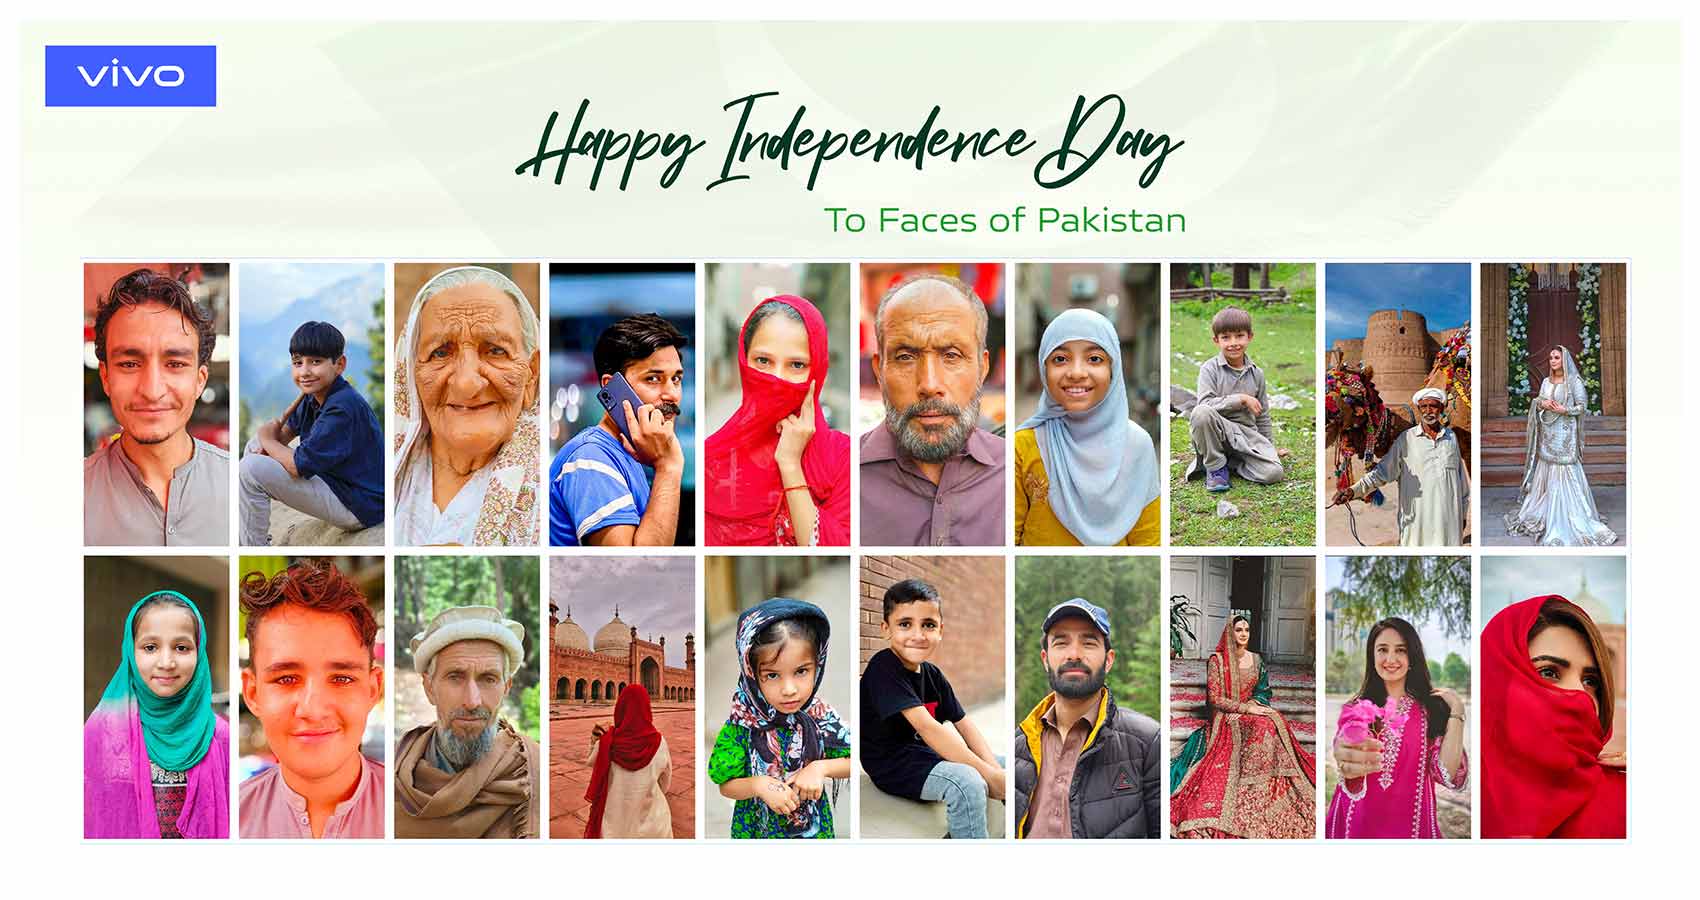 Vivo Honors Pakistan’s Independence Day Showcasing Cultural Diversity Through Advanced Portrait Technology